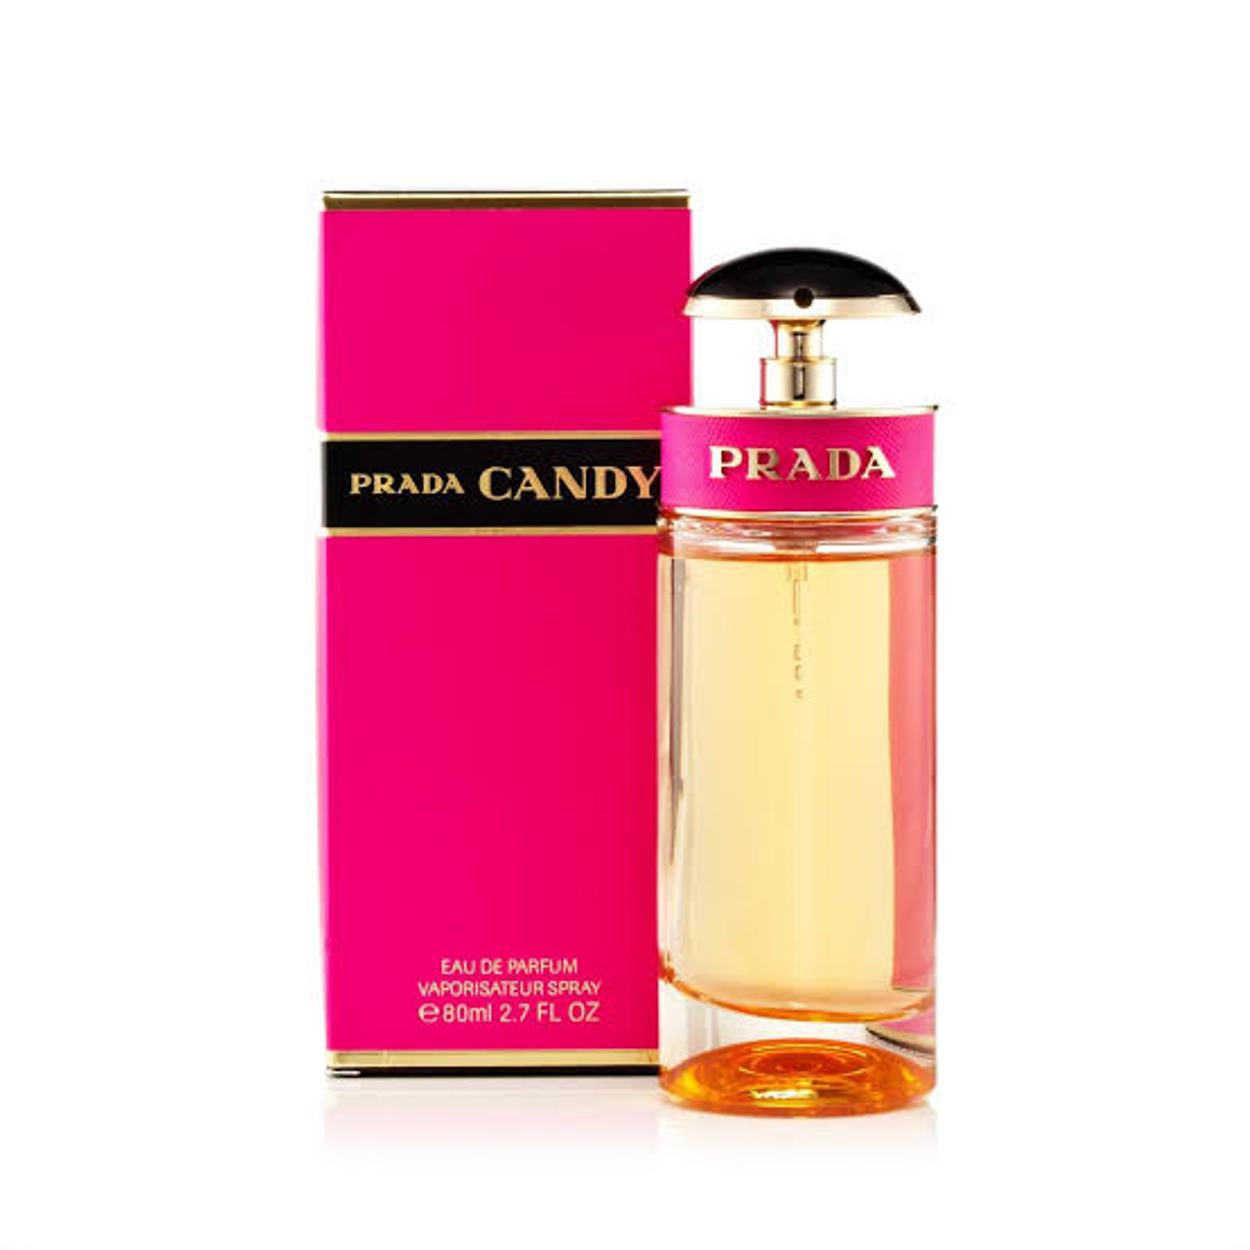 Victoria’s Secret Perfumes Vs. Prada Candy Perfumes – All The Differences